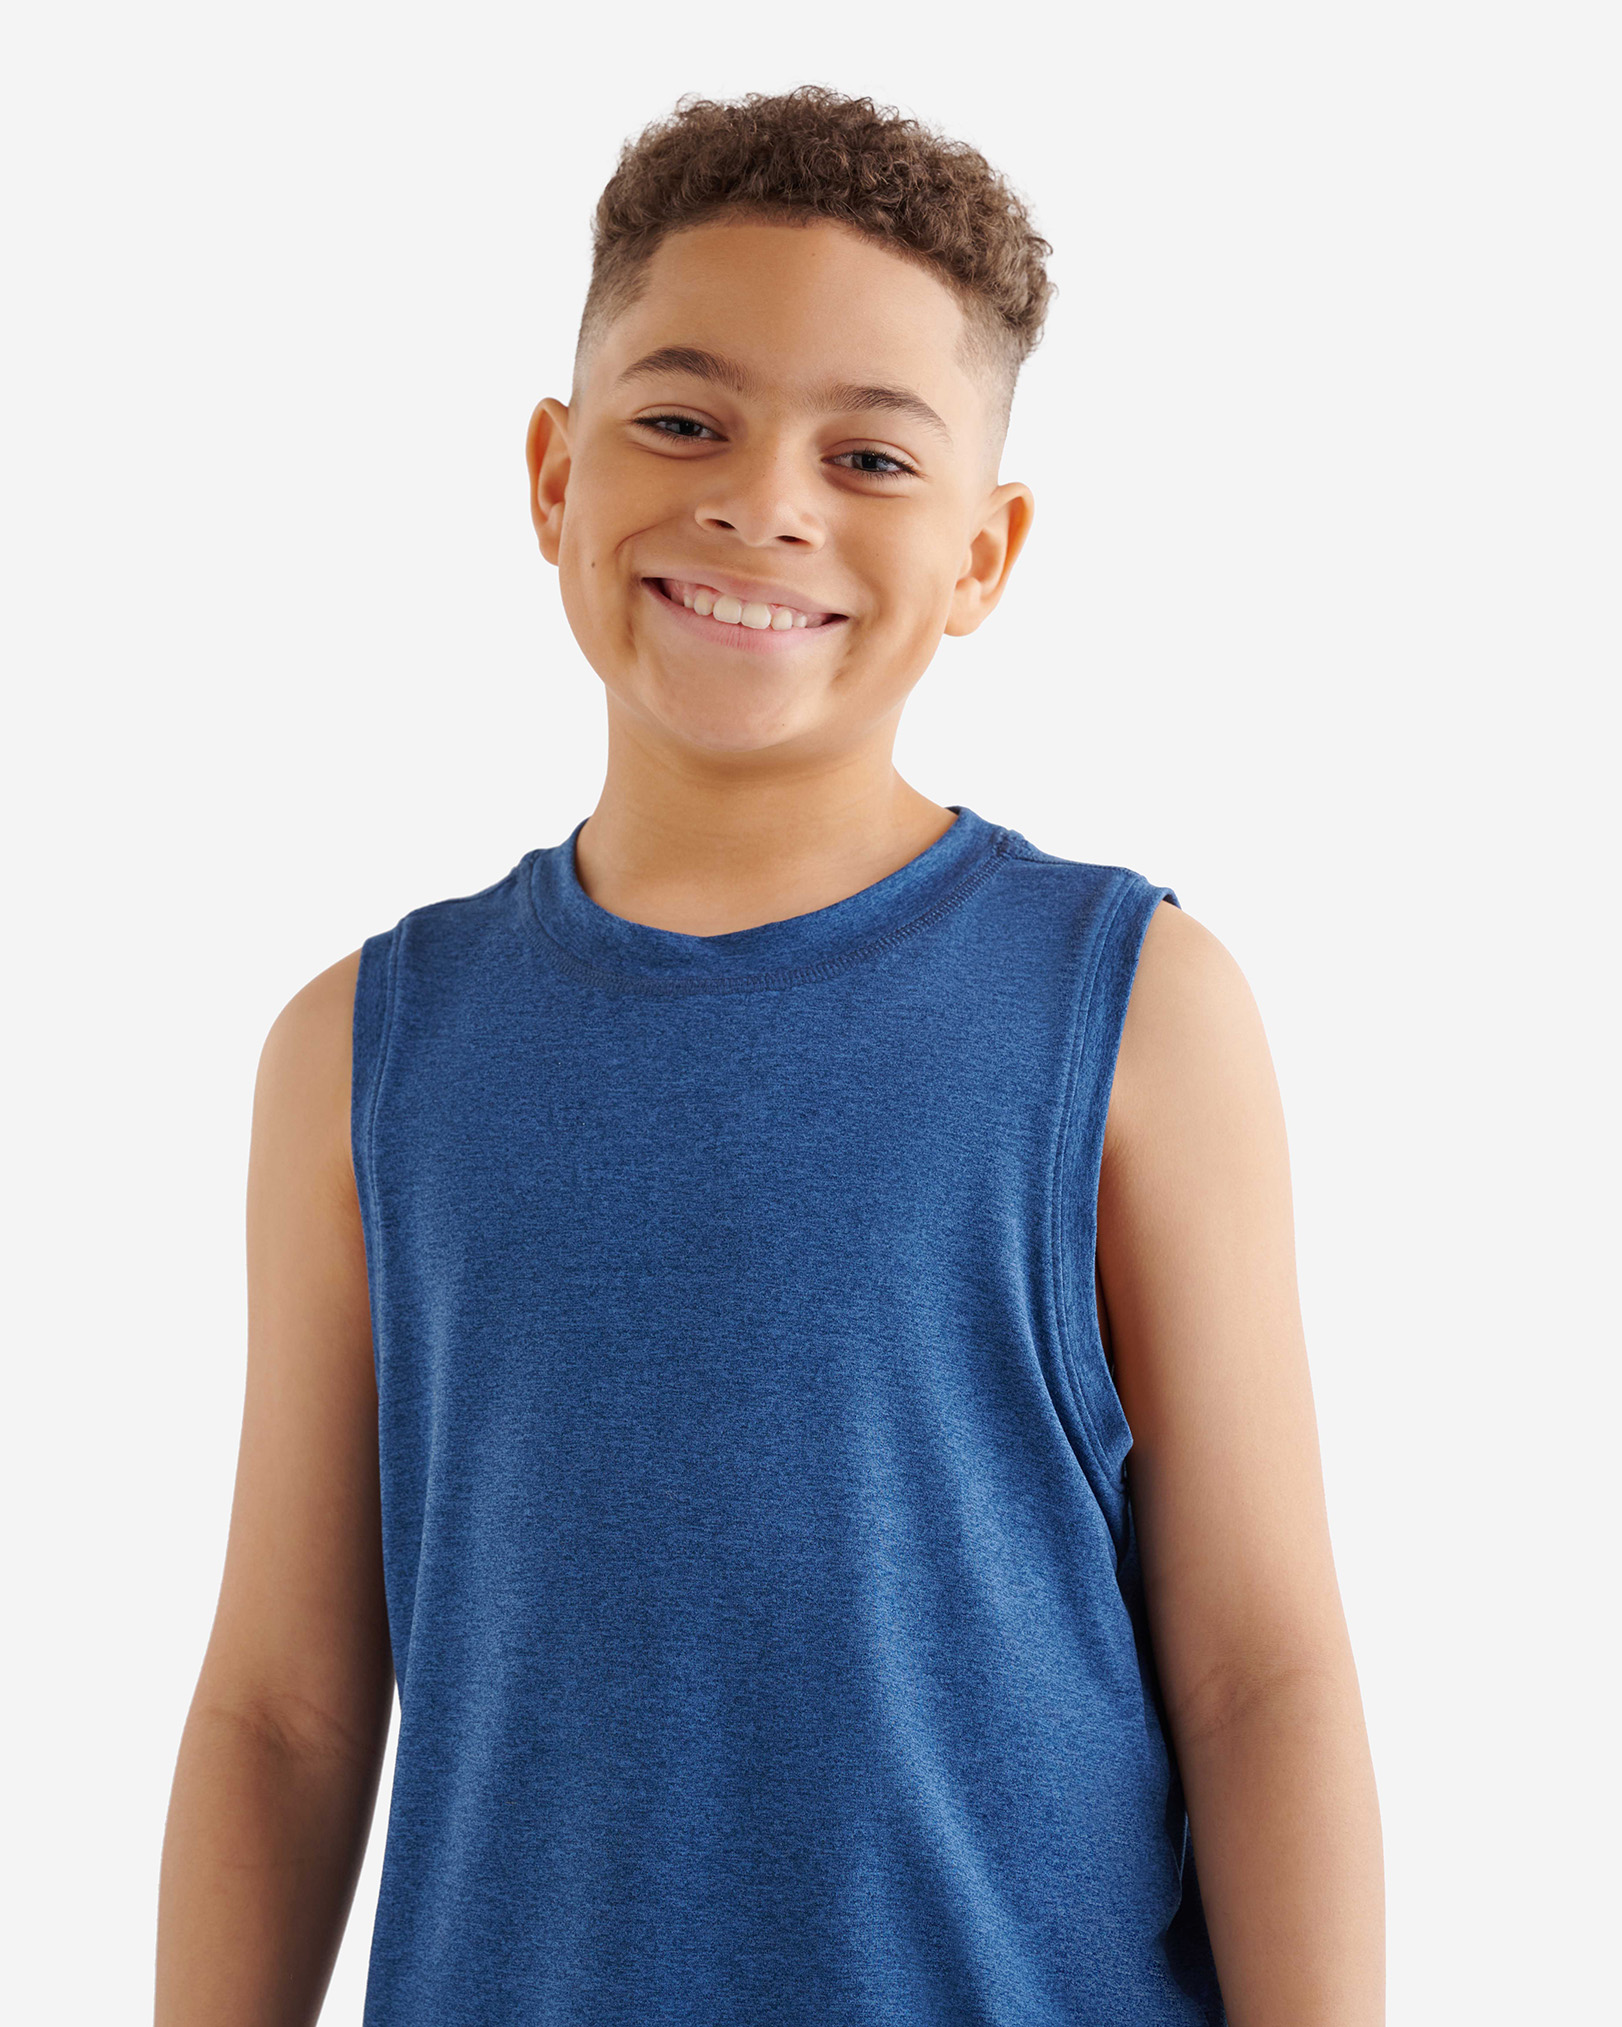 Roots Boy's Active Tank Top in Estate Blue Pepper